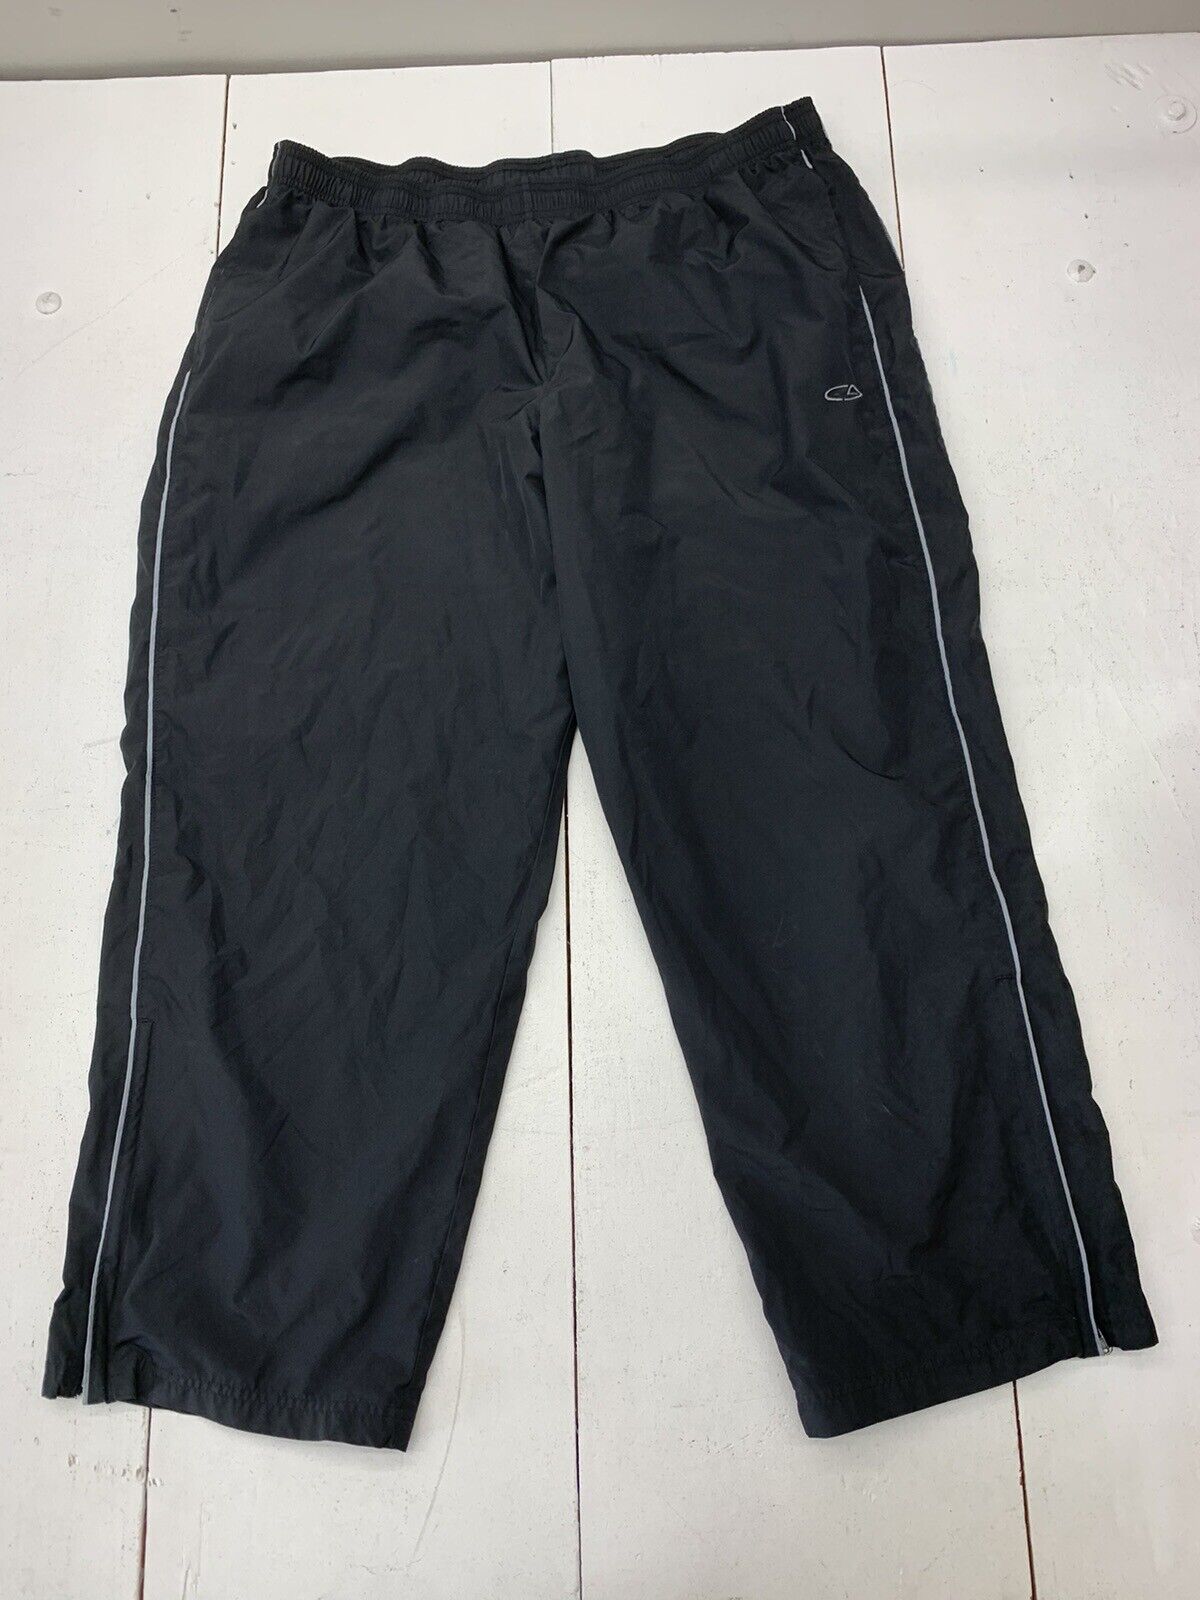 c9 by champion Active Track Pants for Men